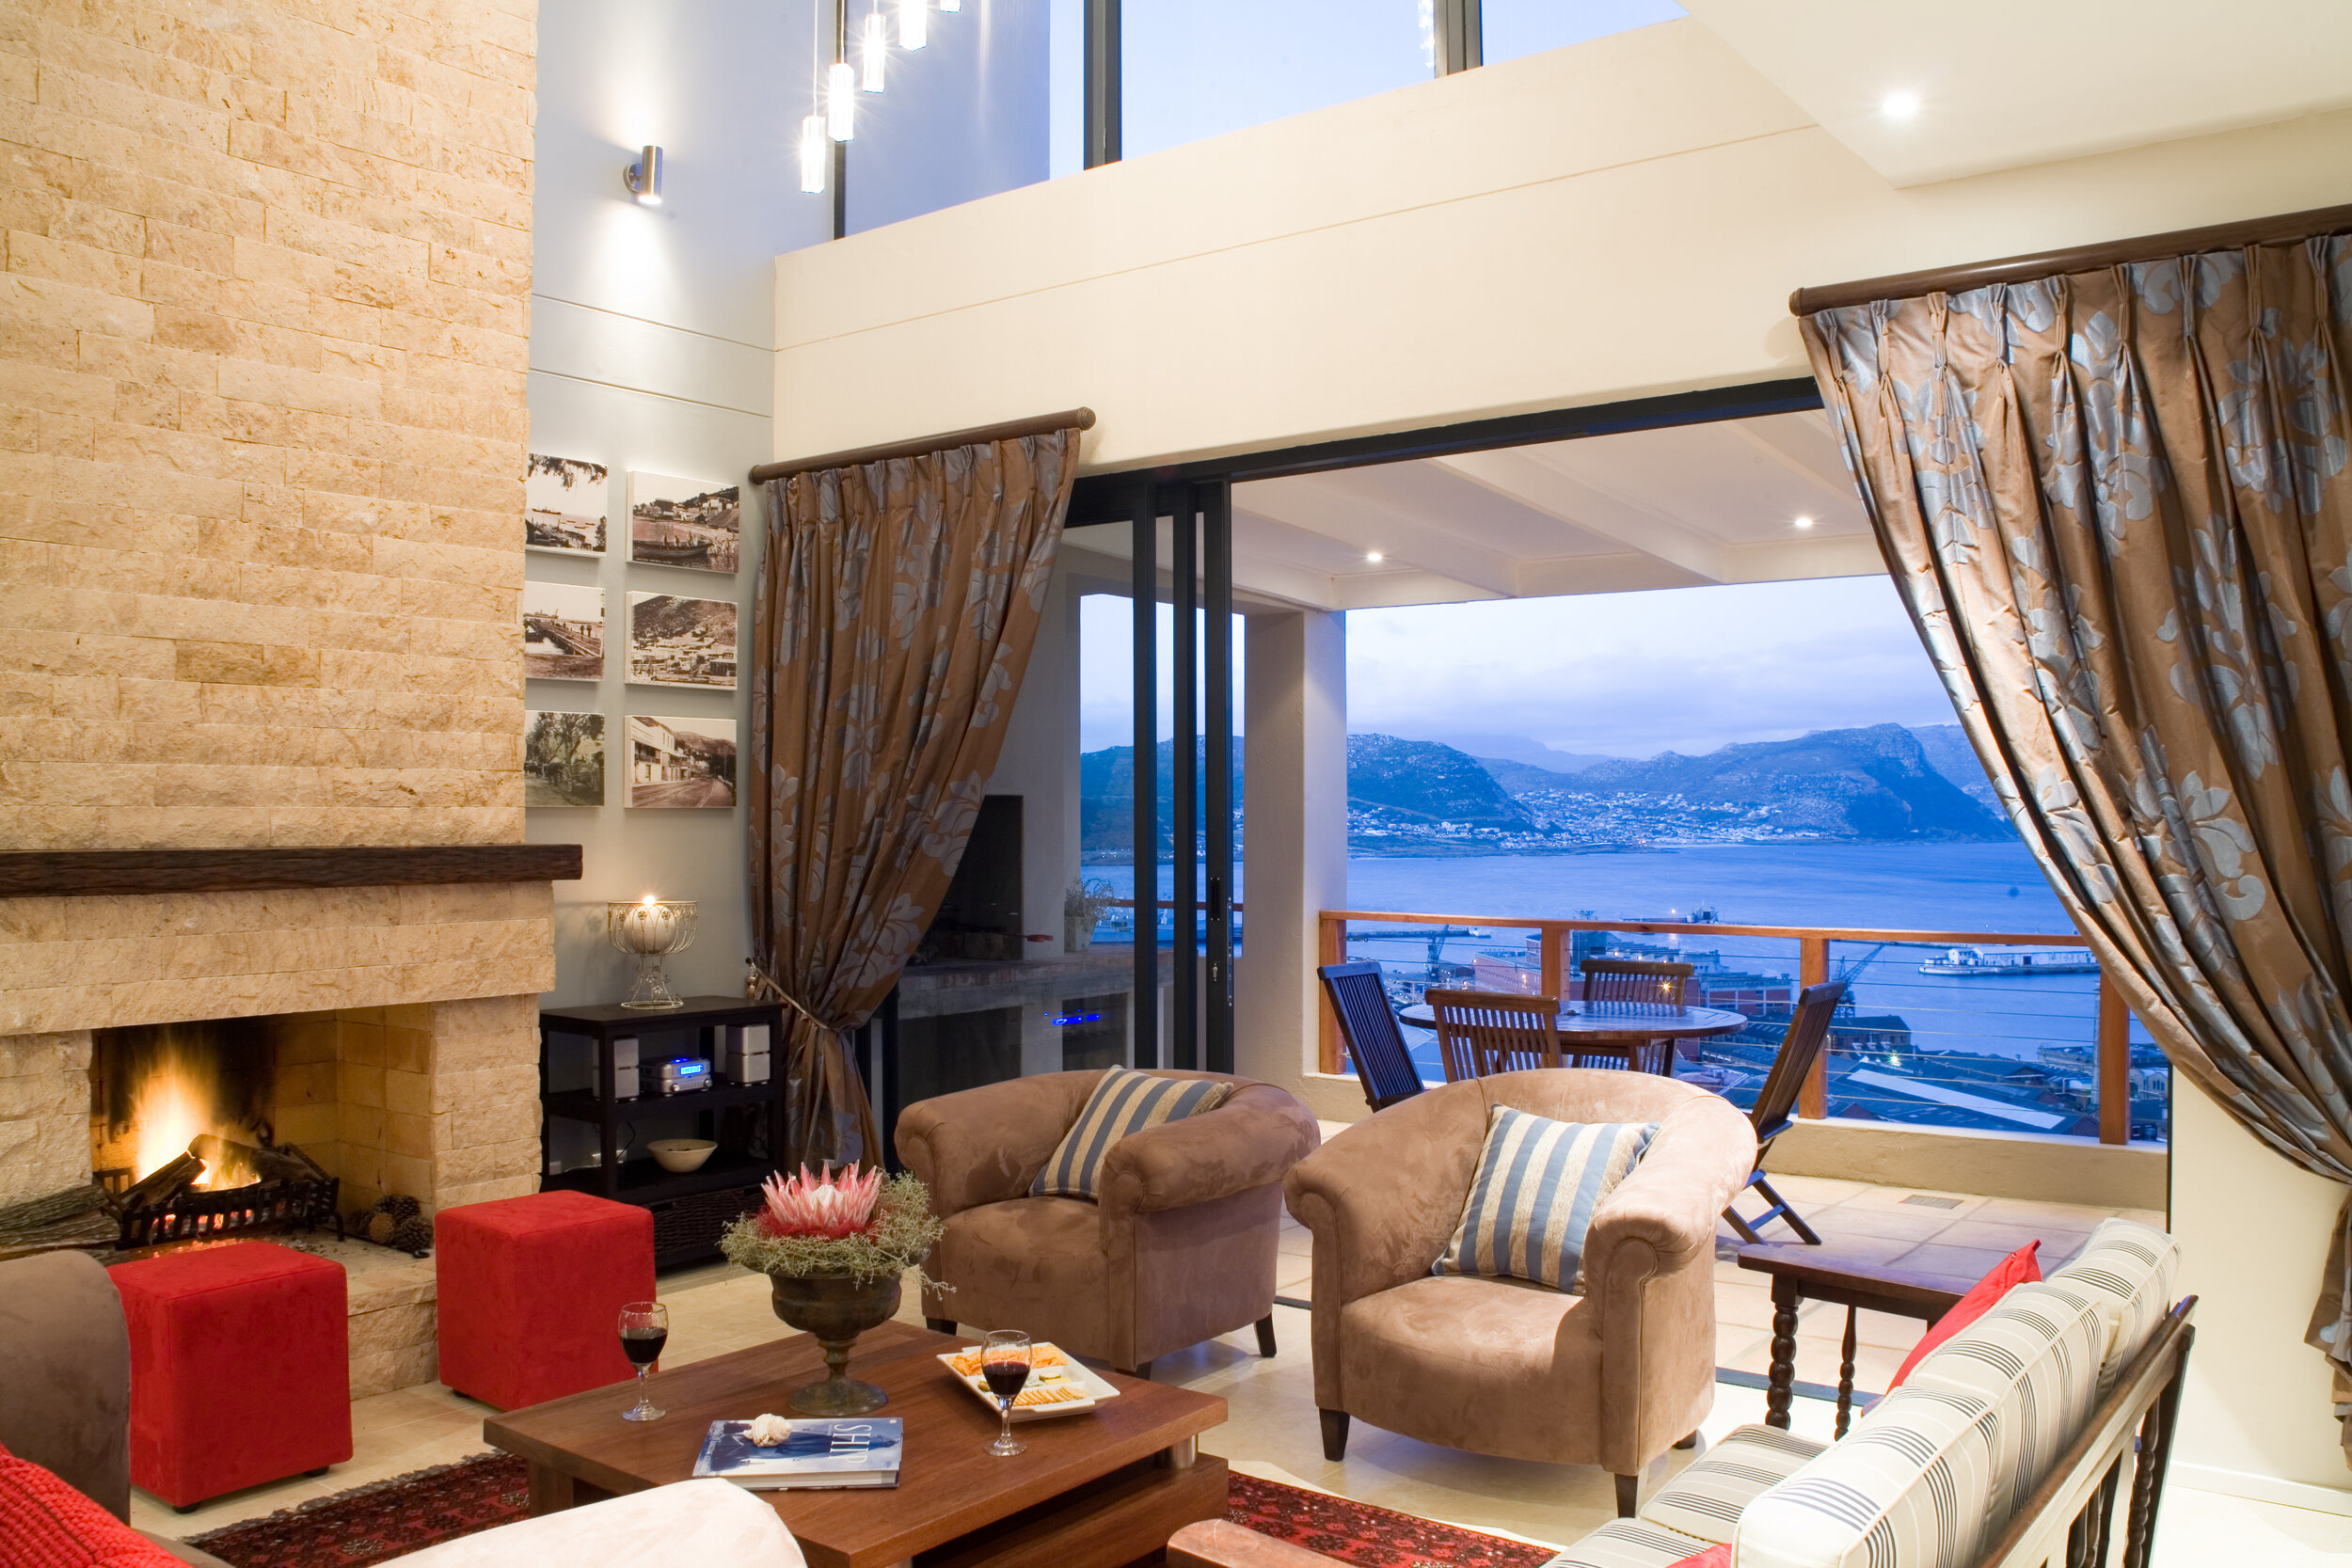 Mariner HI RESLiving Room with fireplace and view.jpg